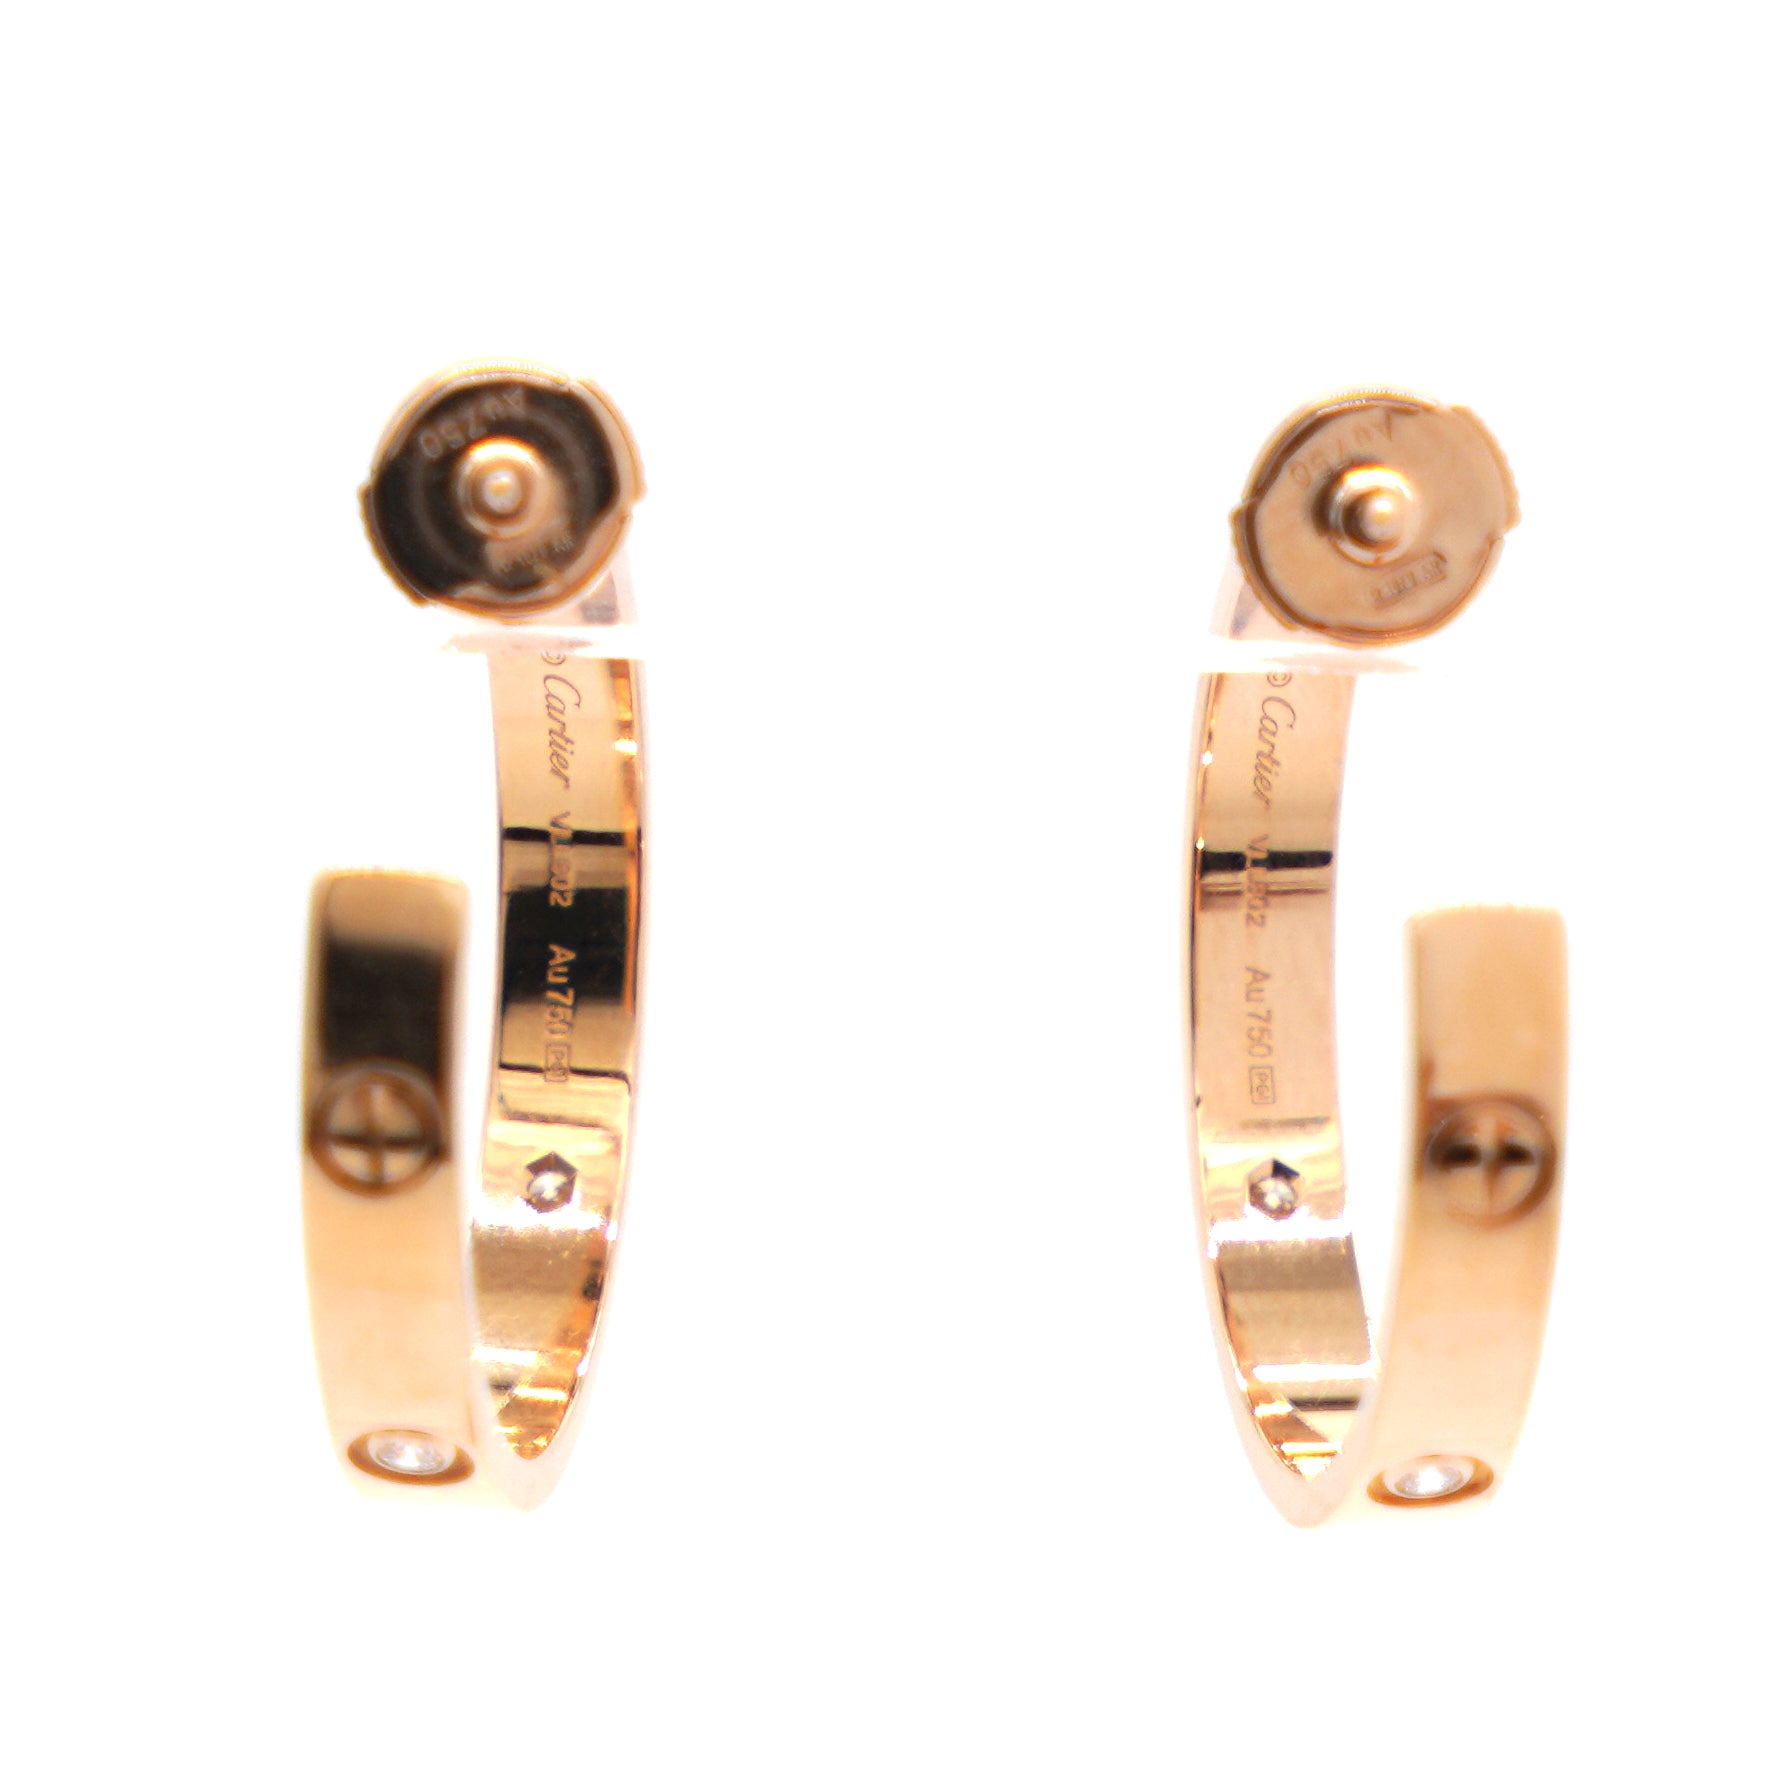 Sold at Auction: 14K YELLOW GOLD CARTIER STYLE NAIL HOOP EARRINGS 3.8G